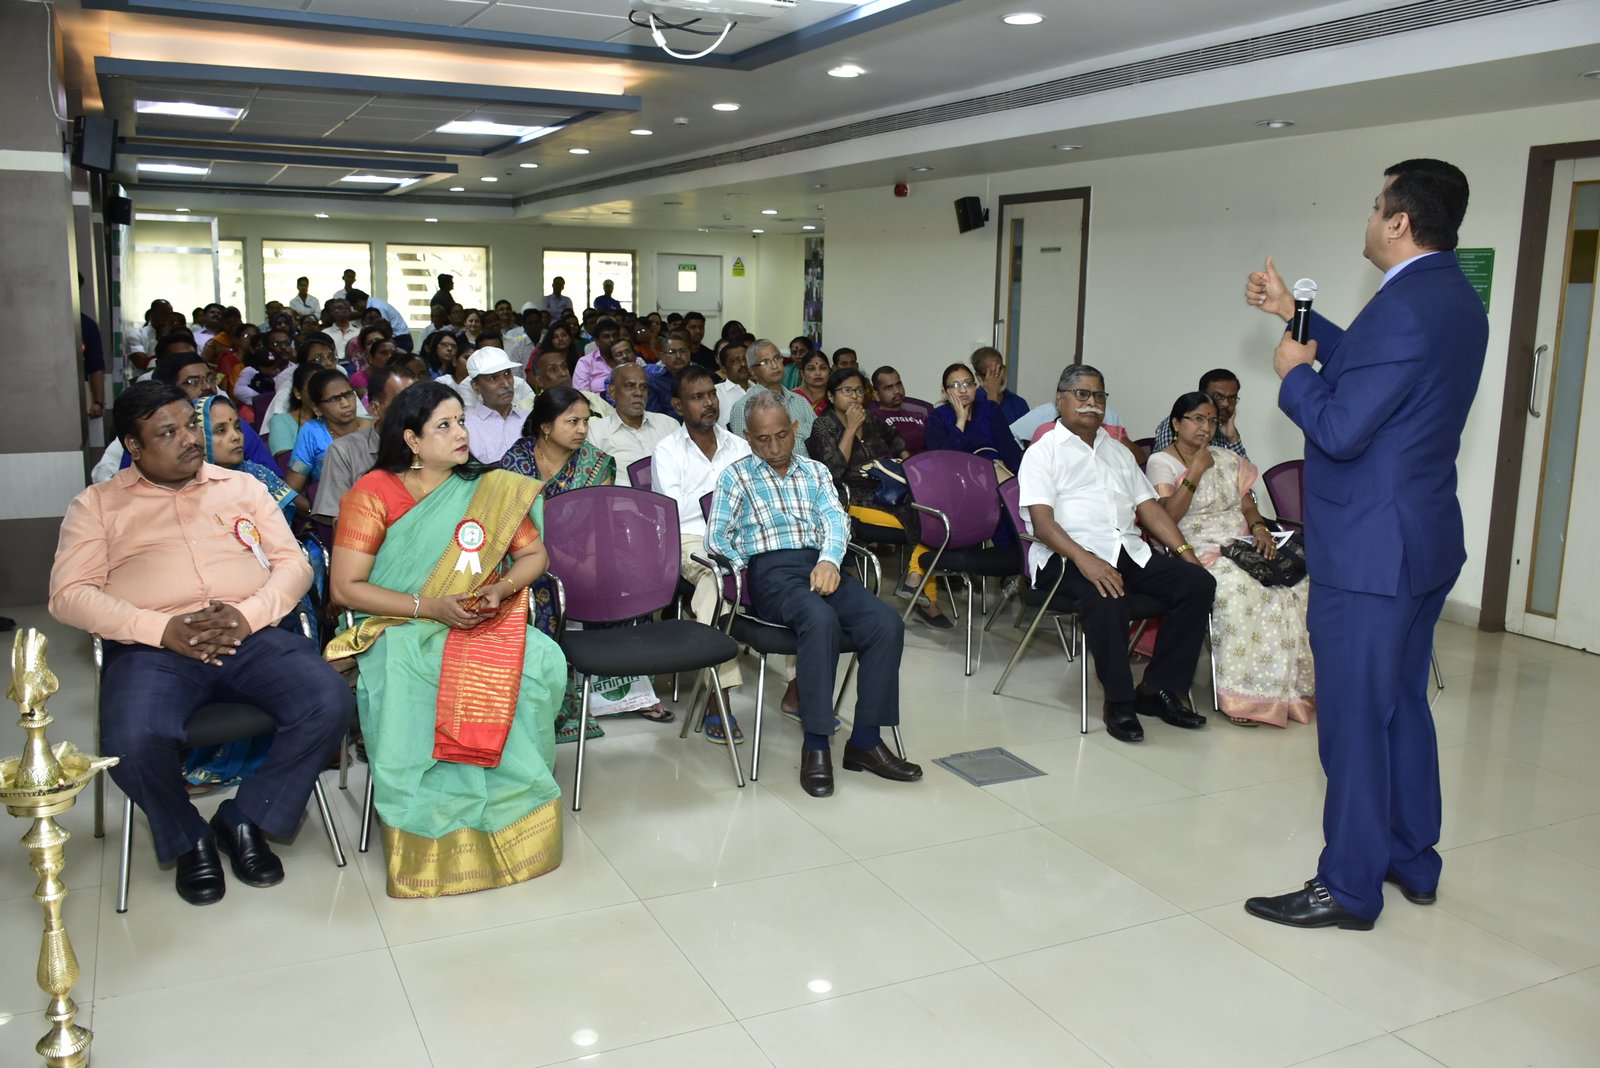 Dr Haresh Dodeja, Consultant Nephrologist addressing the audience on Kidney health, Kidney Transplants, its advantages and processes at the Kidney Care seminar organized at Fortis Hospital, Mulund in observance of World Kidney Day 2019